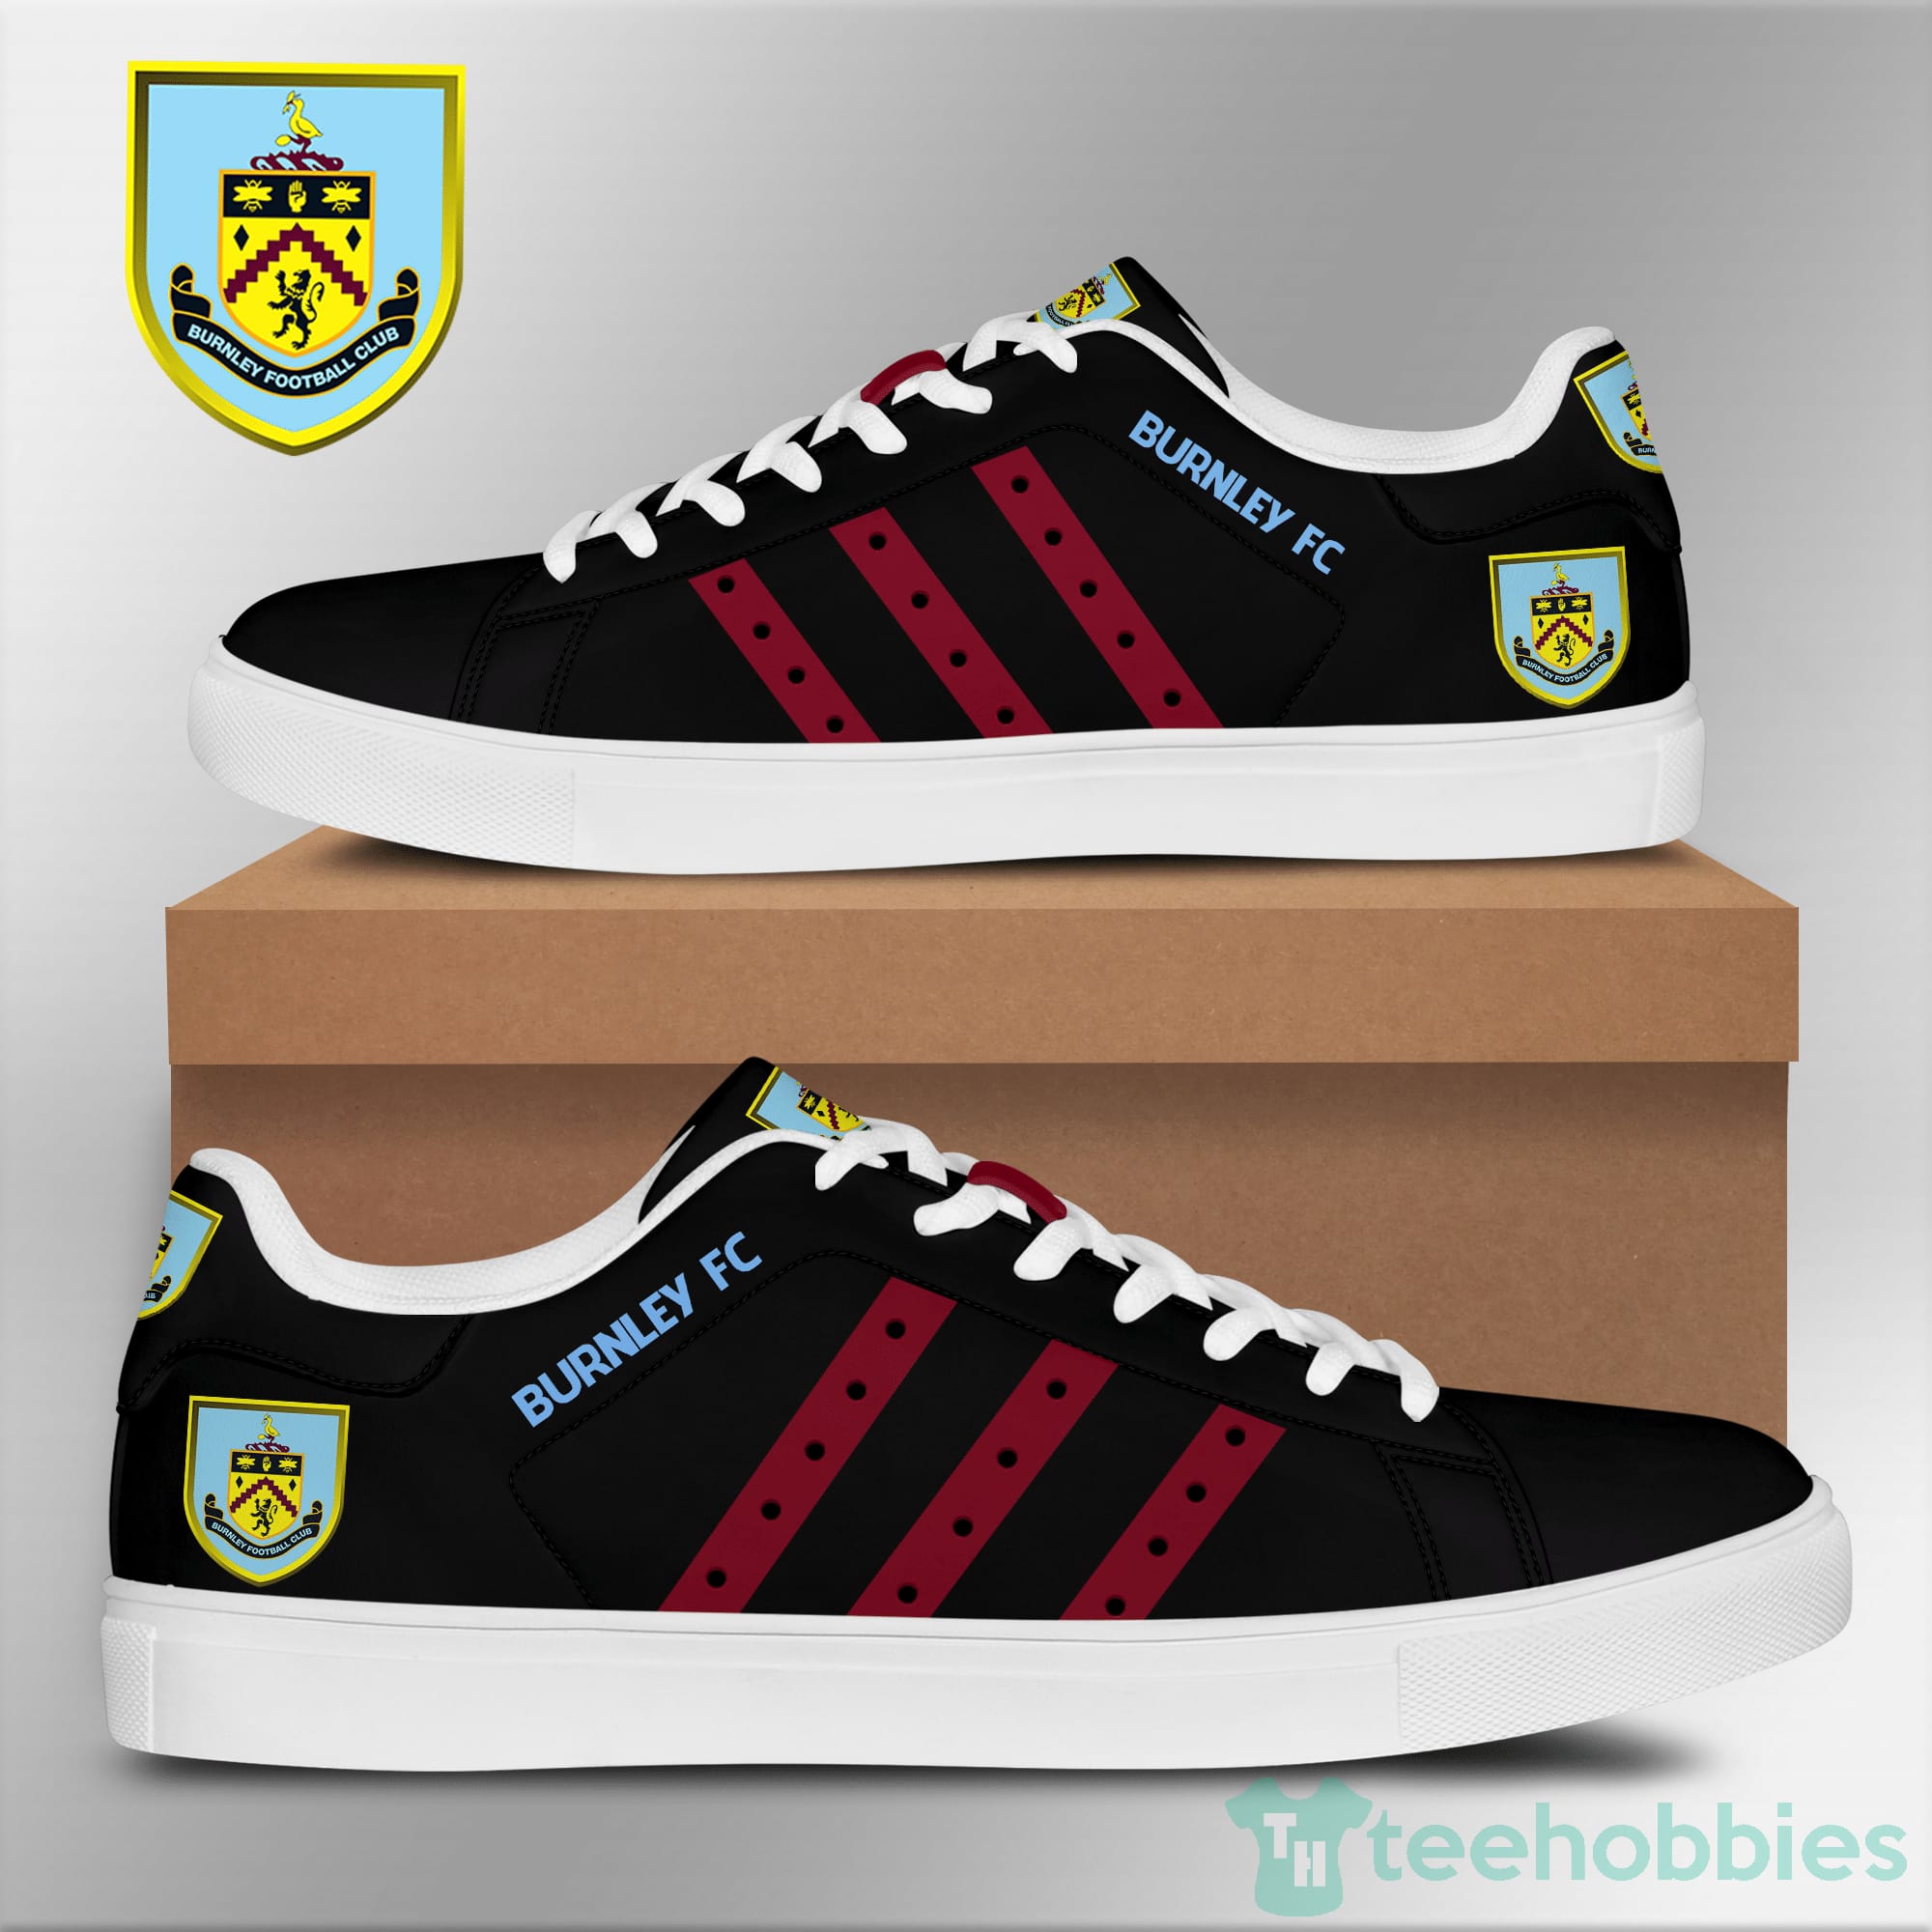 Burnley F.C Black Low Top Skate Shoes Product photo 1